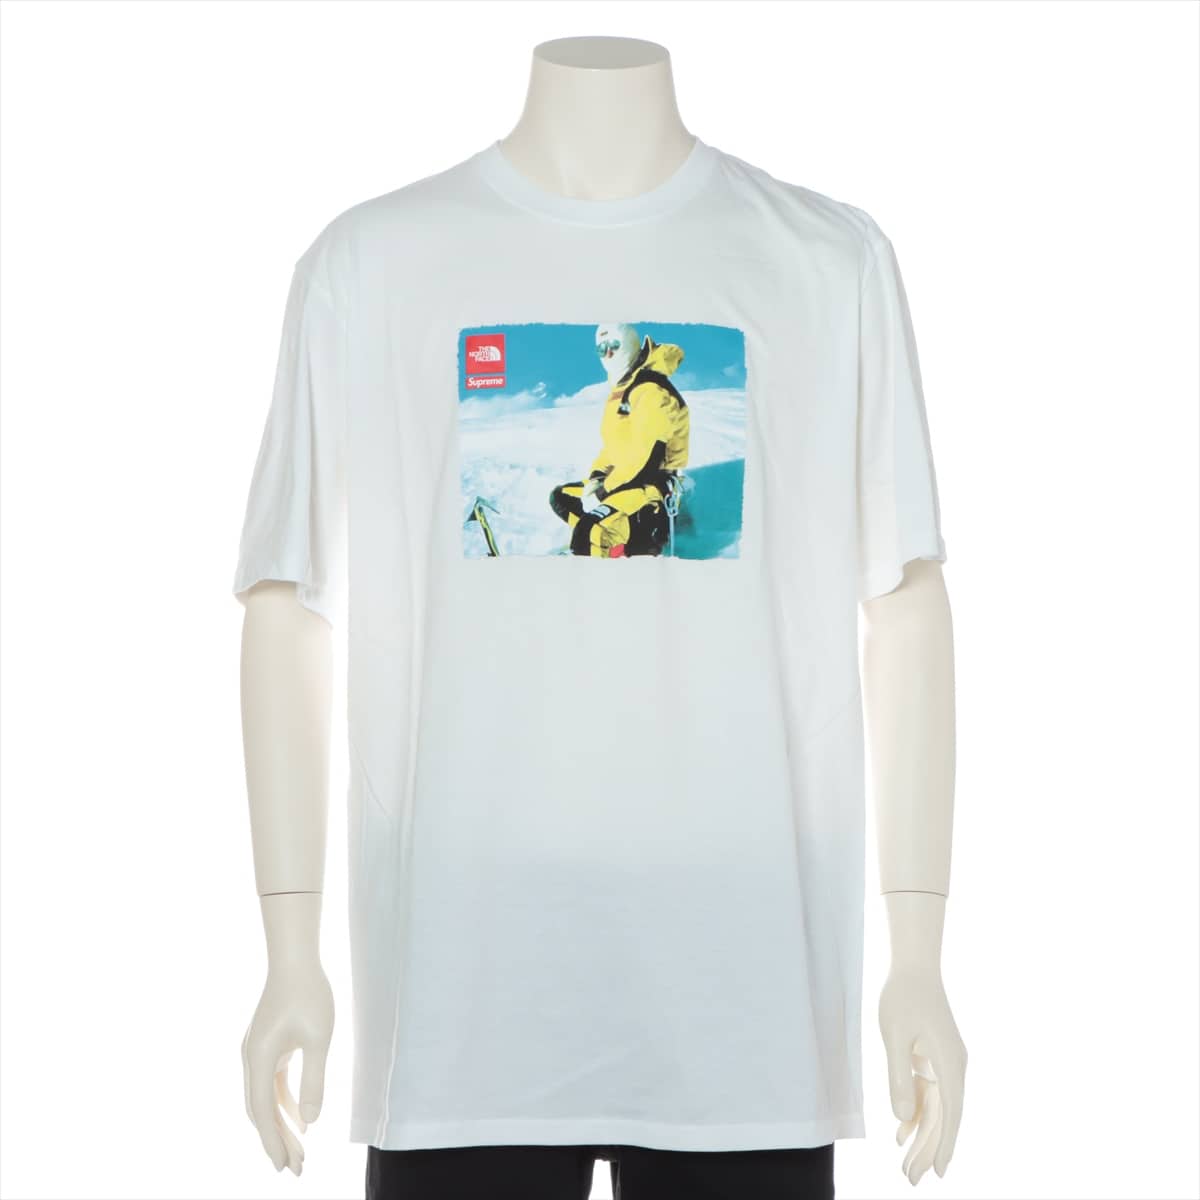 SUPREME × THE NORTH FACE 18AW Cotton T-shirt L Men's White  EXPEDITION Out of tag